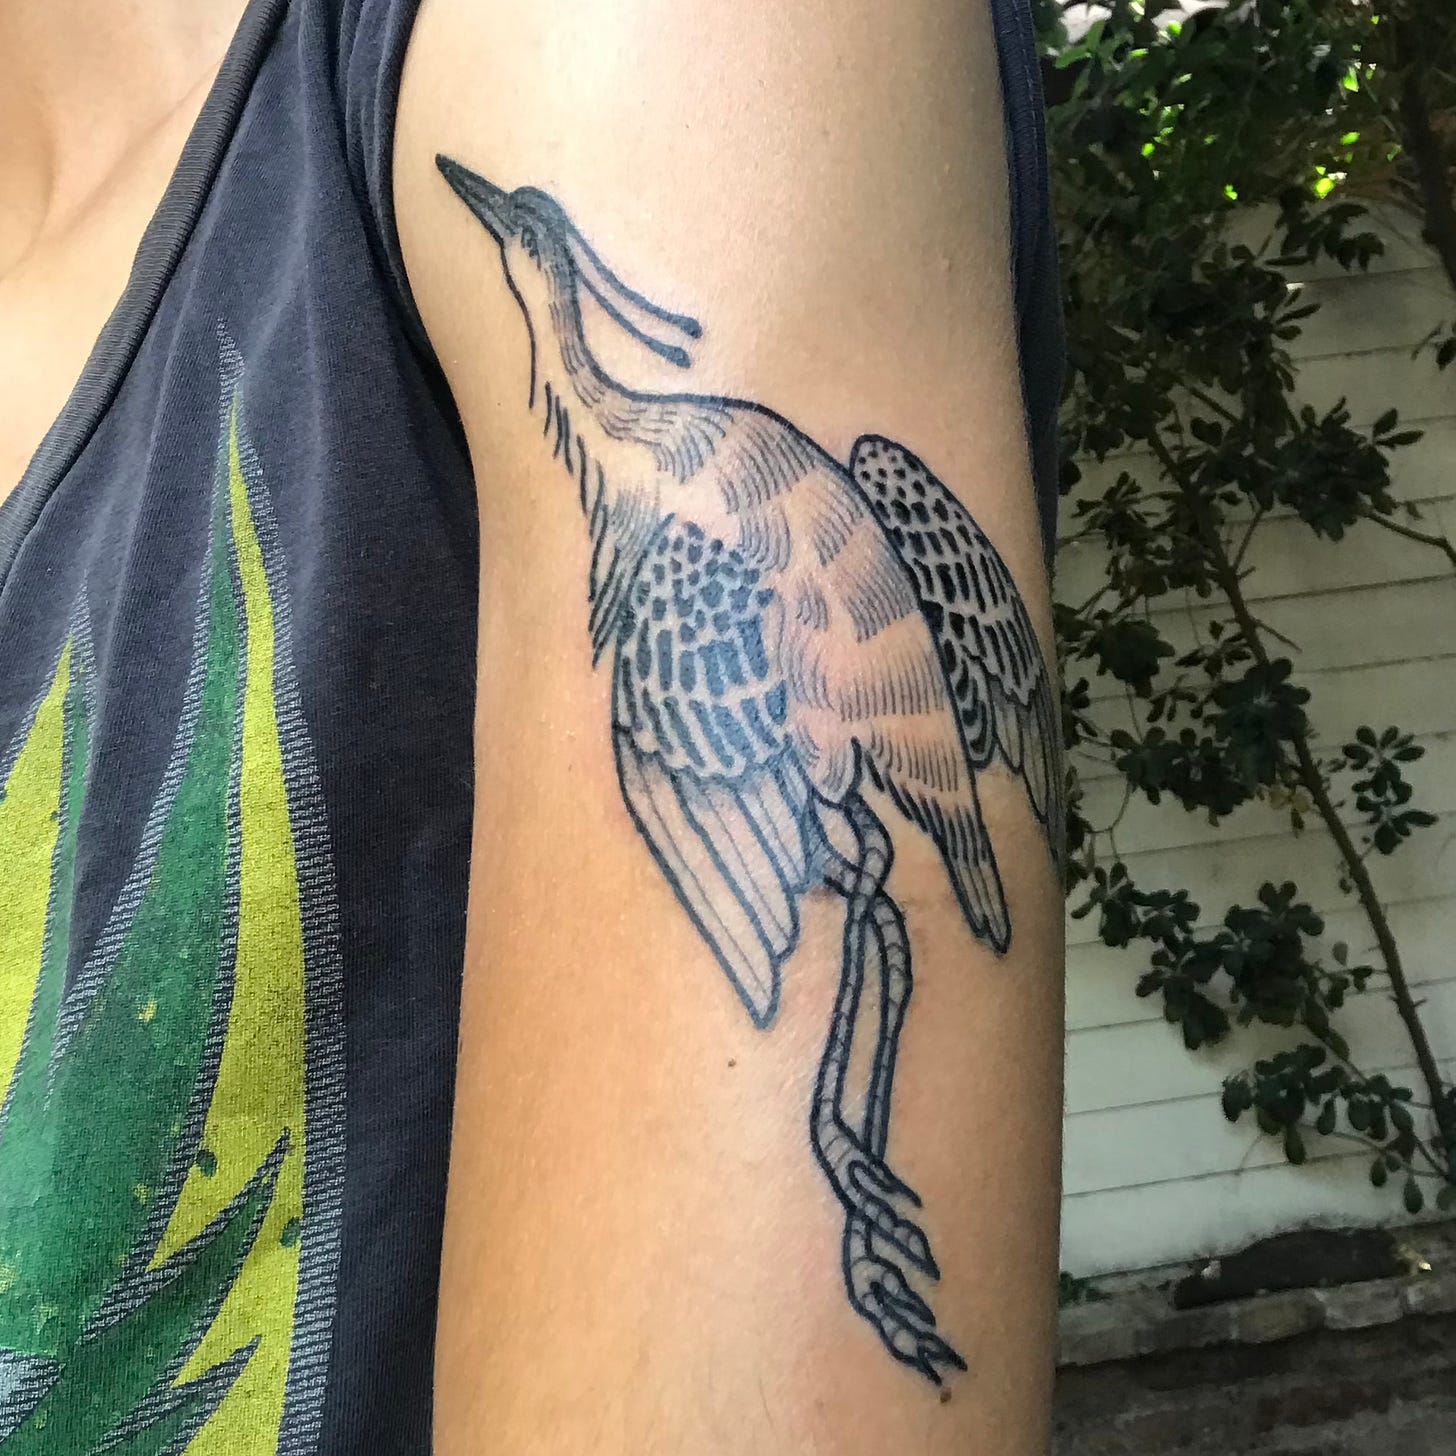 A thin-lined, black-inked heron flies up a forearm. There are delicate, feathery dashes and thick shadows, the tattoo is beautiful. To the left of the bare arm, a dark t-shirt with a colorful, flamelike design, fills the screen. The sleeve is rolled up to reveal the healing art. Behind, A white wall with some sparse bushes growing up it